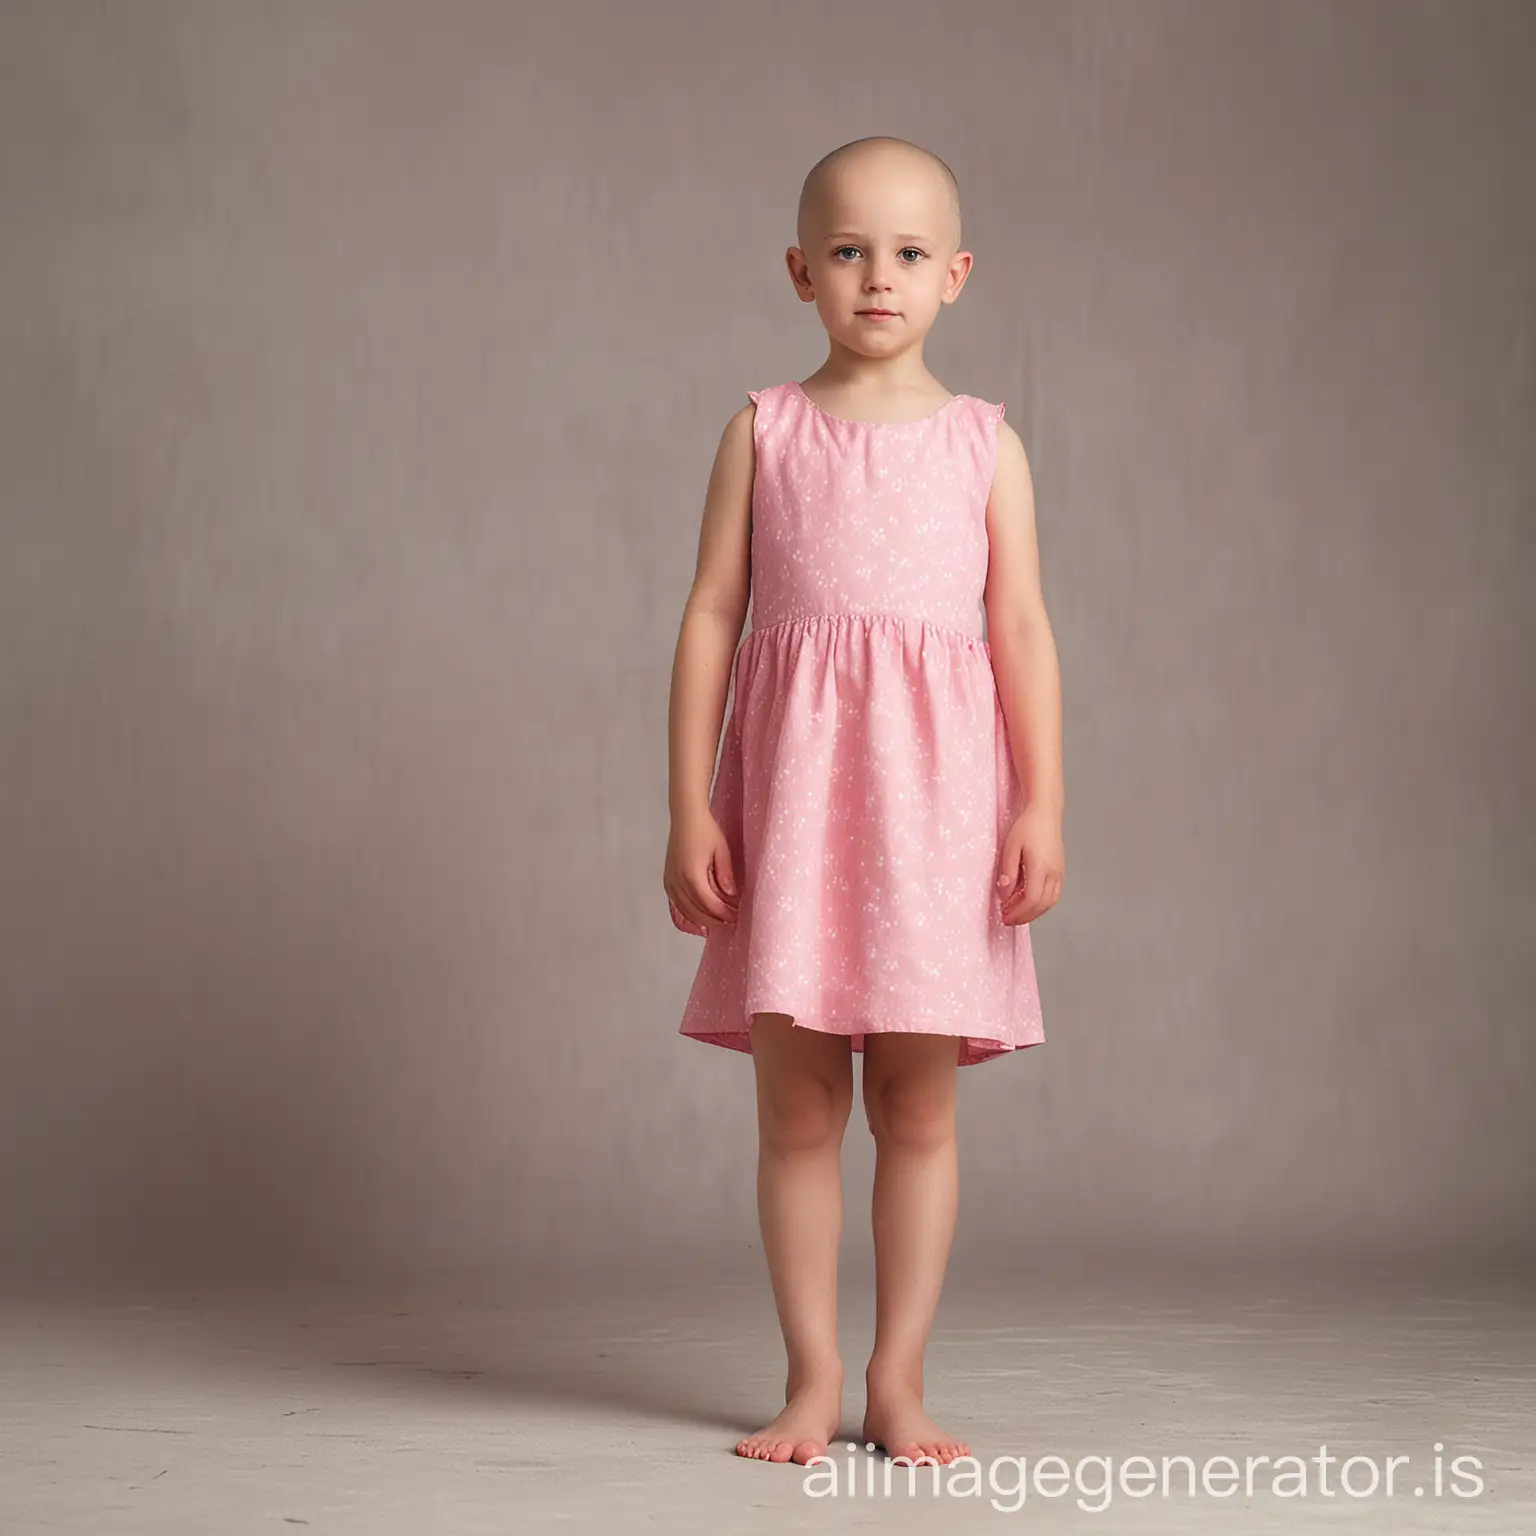 Young-Girl-with-Pink-Dress-Standing-Barefoot